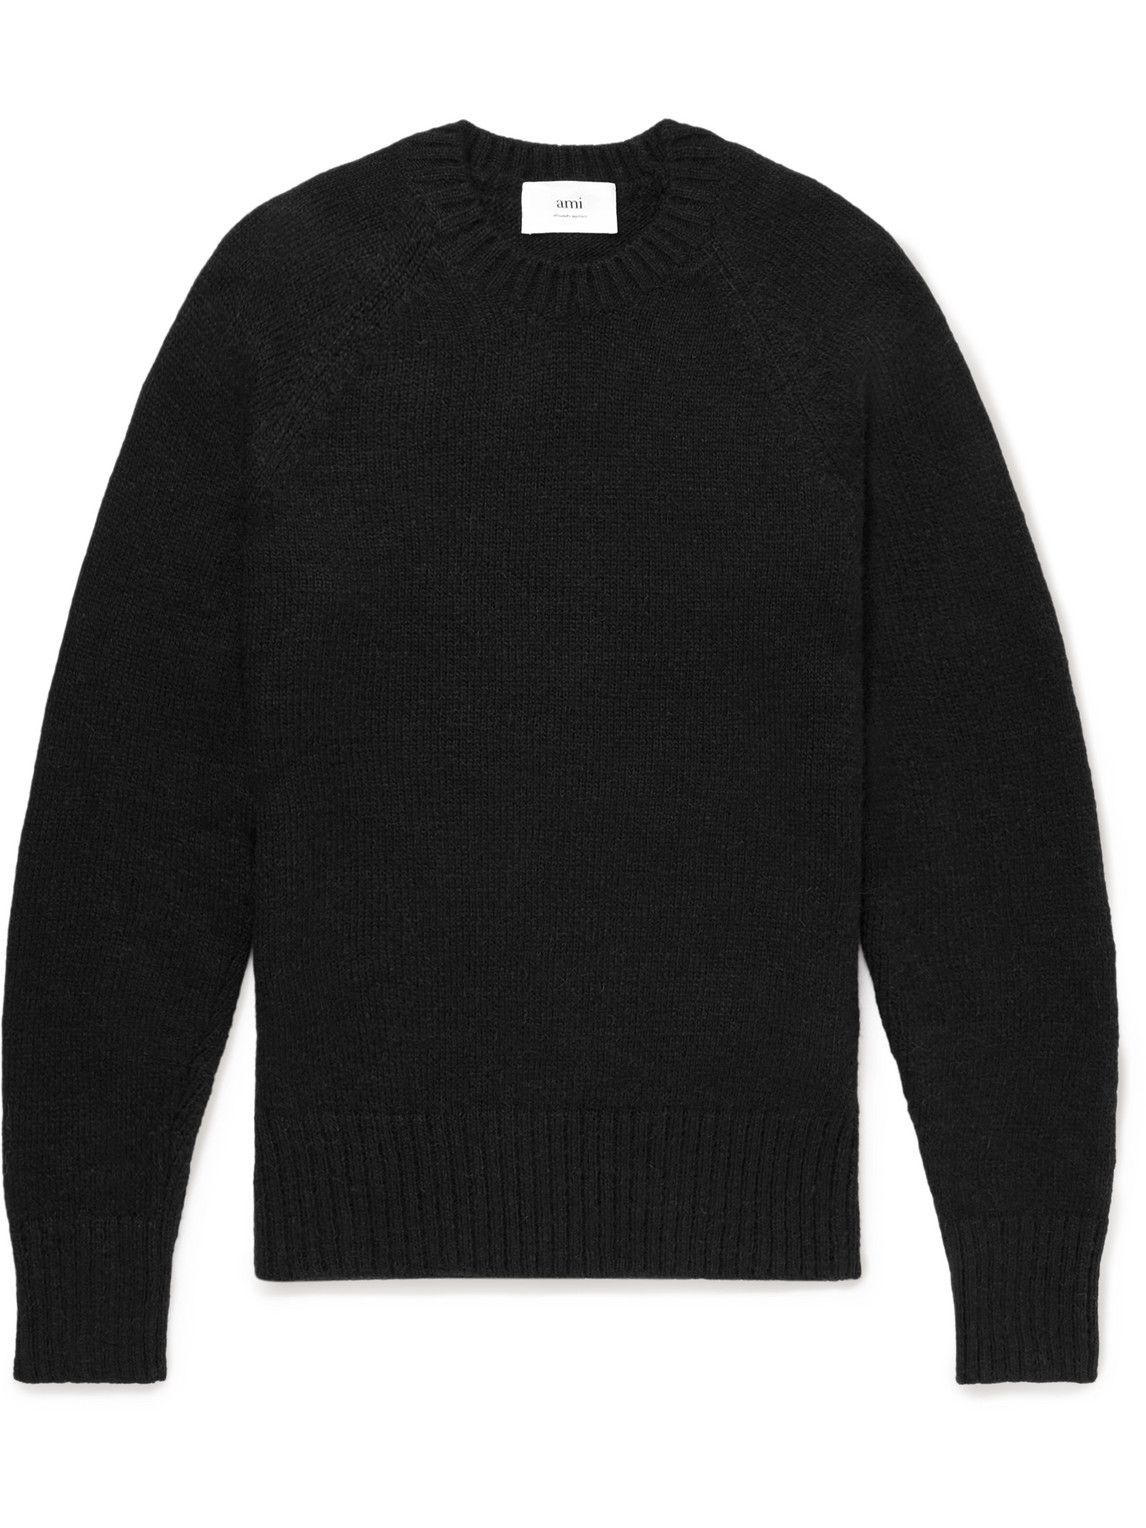 AMI PARIS - Knitted Sweater - Black